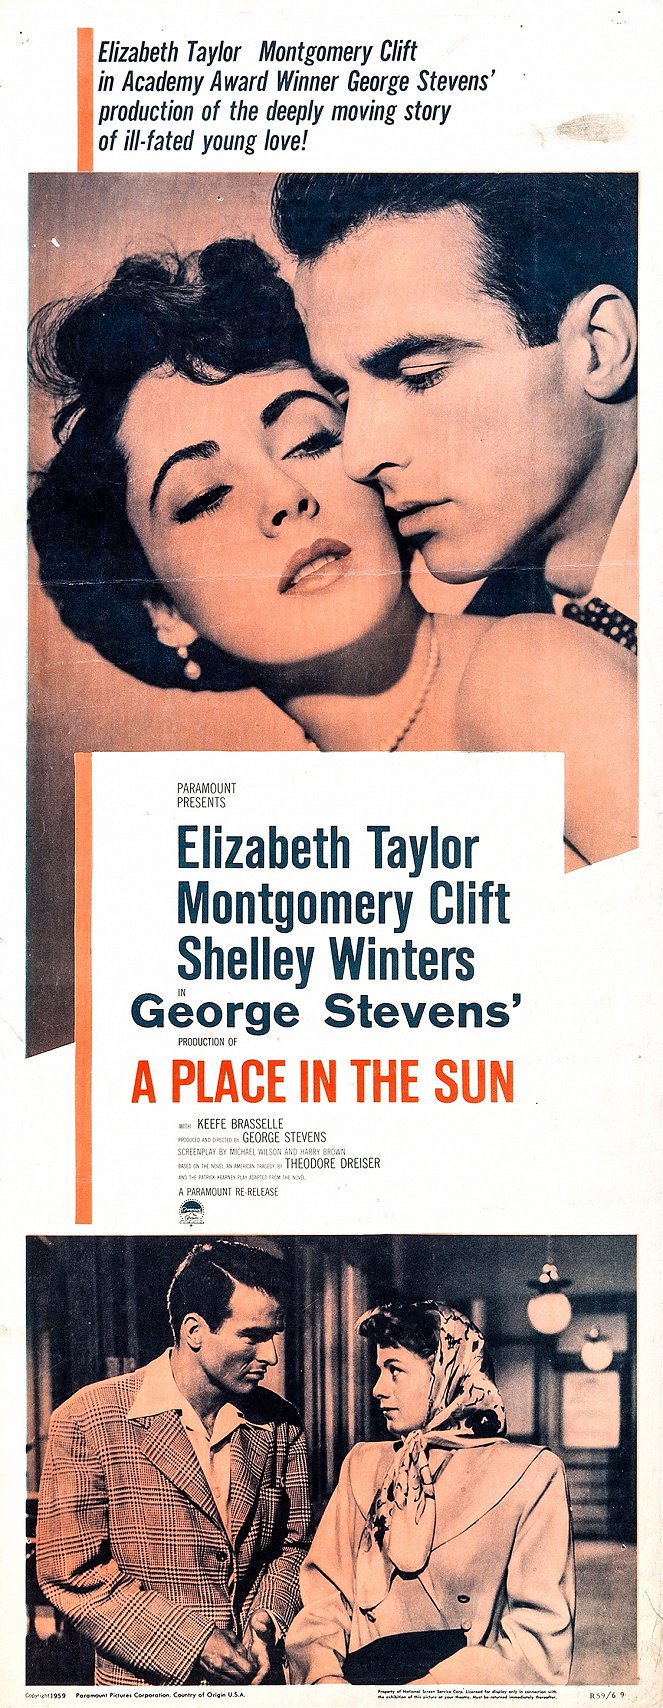 A Place in the Sun - Posters